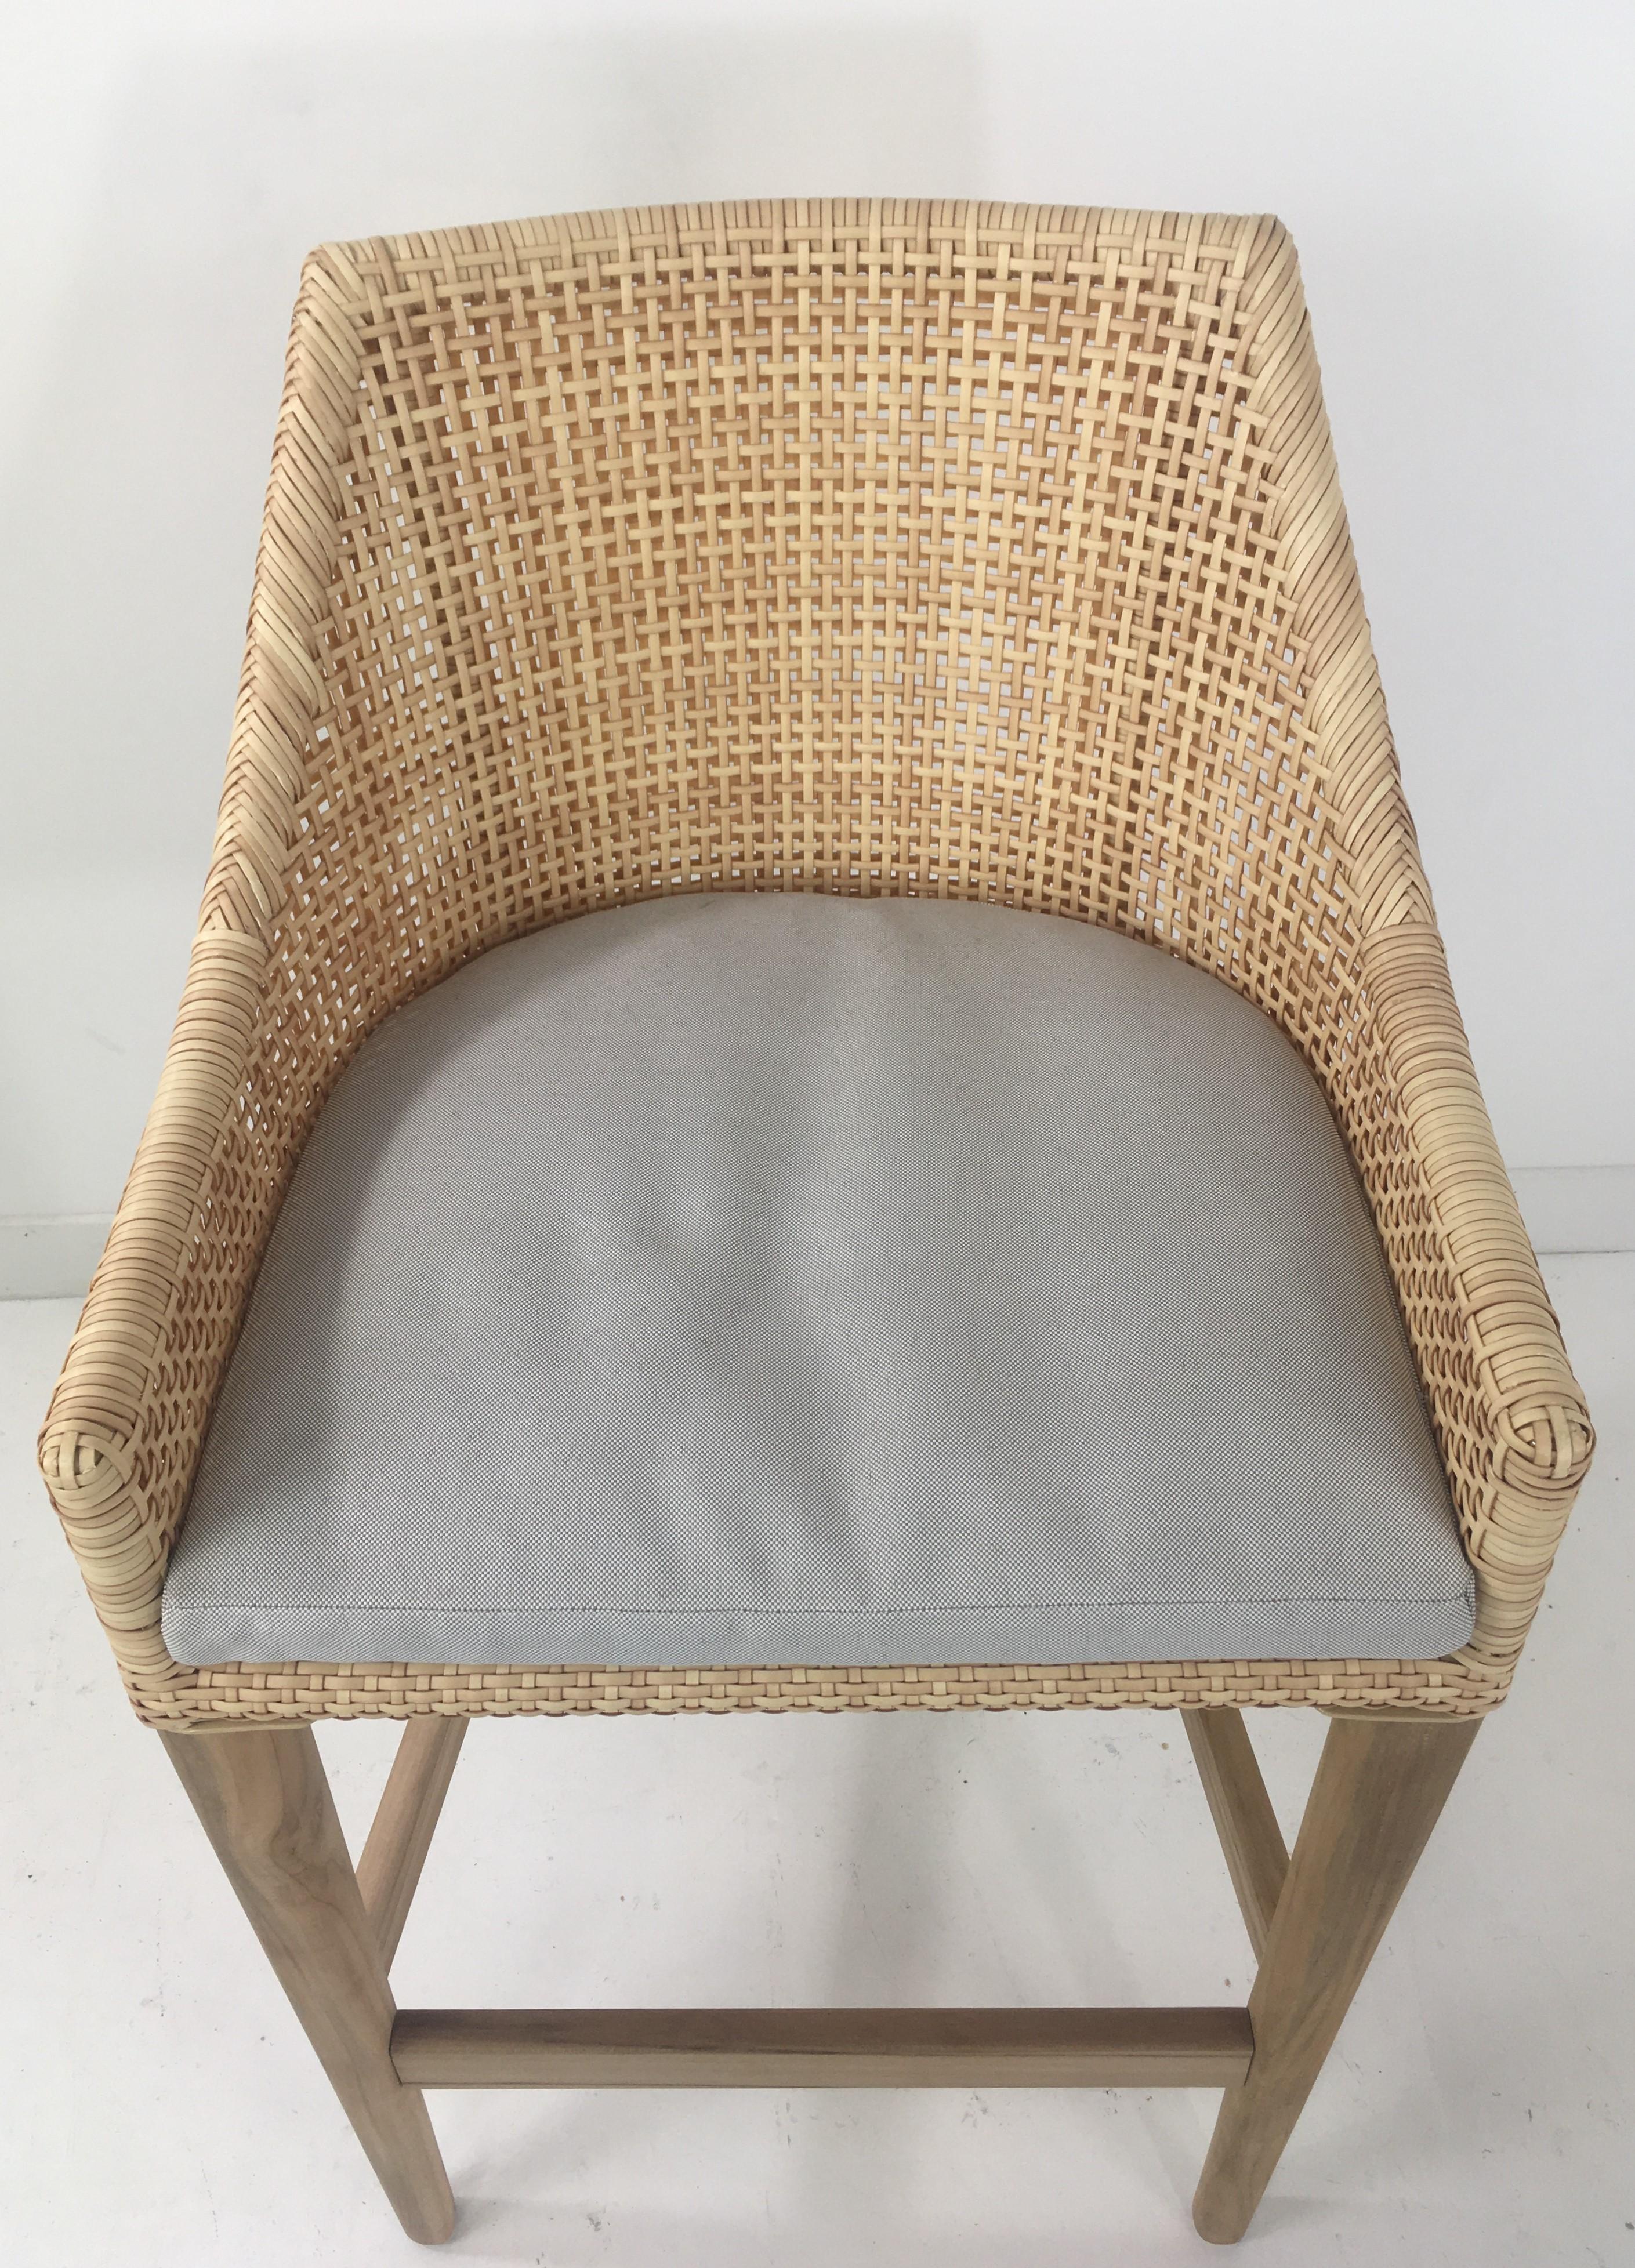 Teak Wooden and Braided Resin Rattan Effect Outdoor Bar Stool For Sale 11